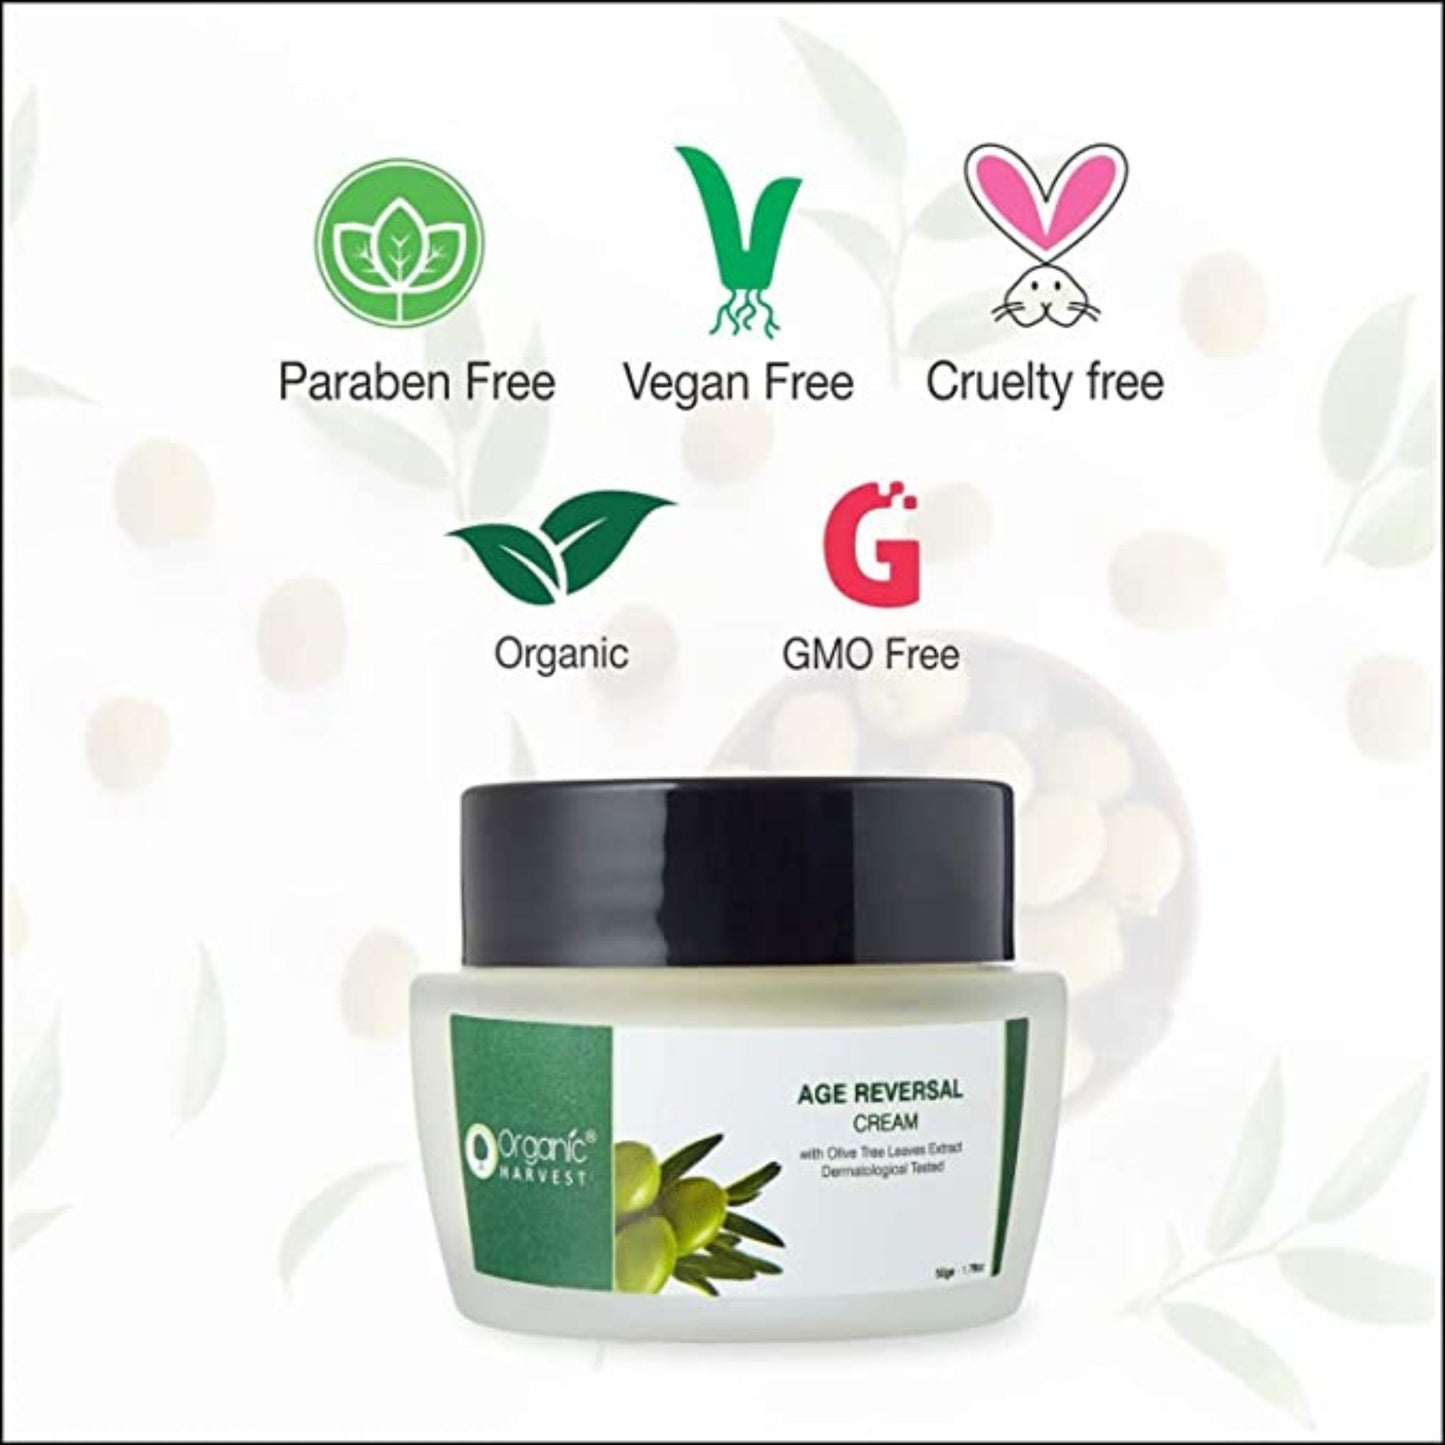 Organic Harvest Age Reversal Cream with Olive Tree Leaves Extract, Delays Signs of Ageing, Reduces Fine Lines & Wrinkles, Boost Skin Elasticity, 100% Organic, Paraben & Sulphate Free - 50gm